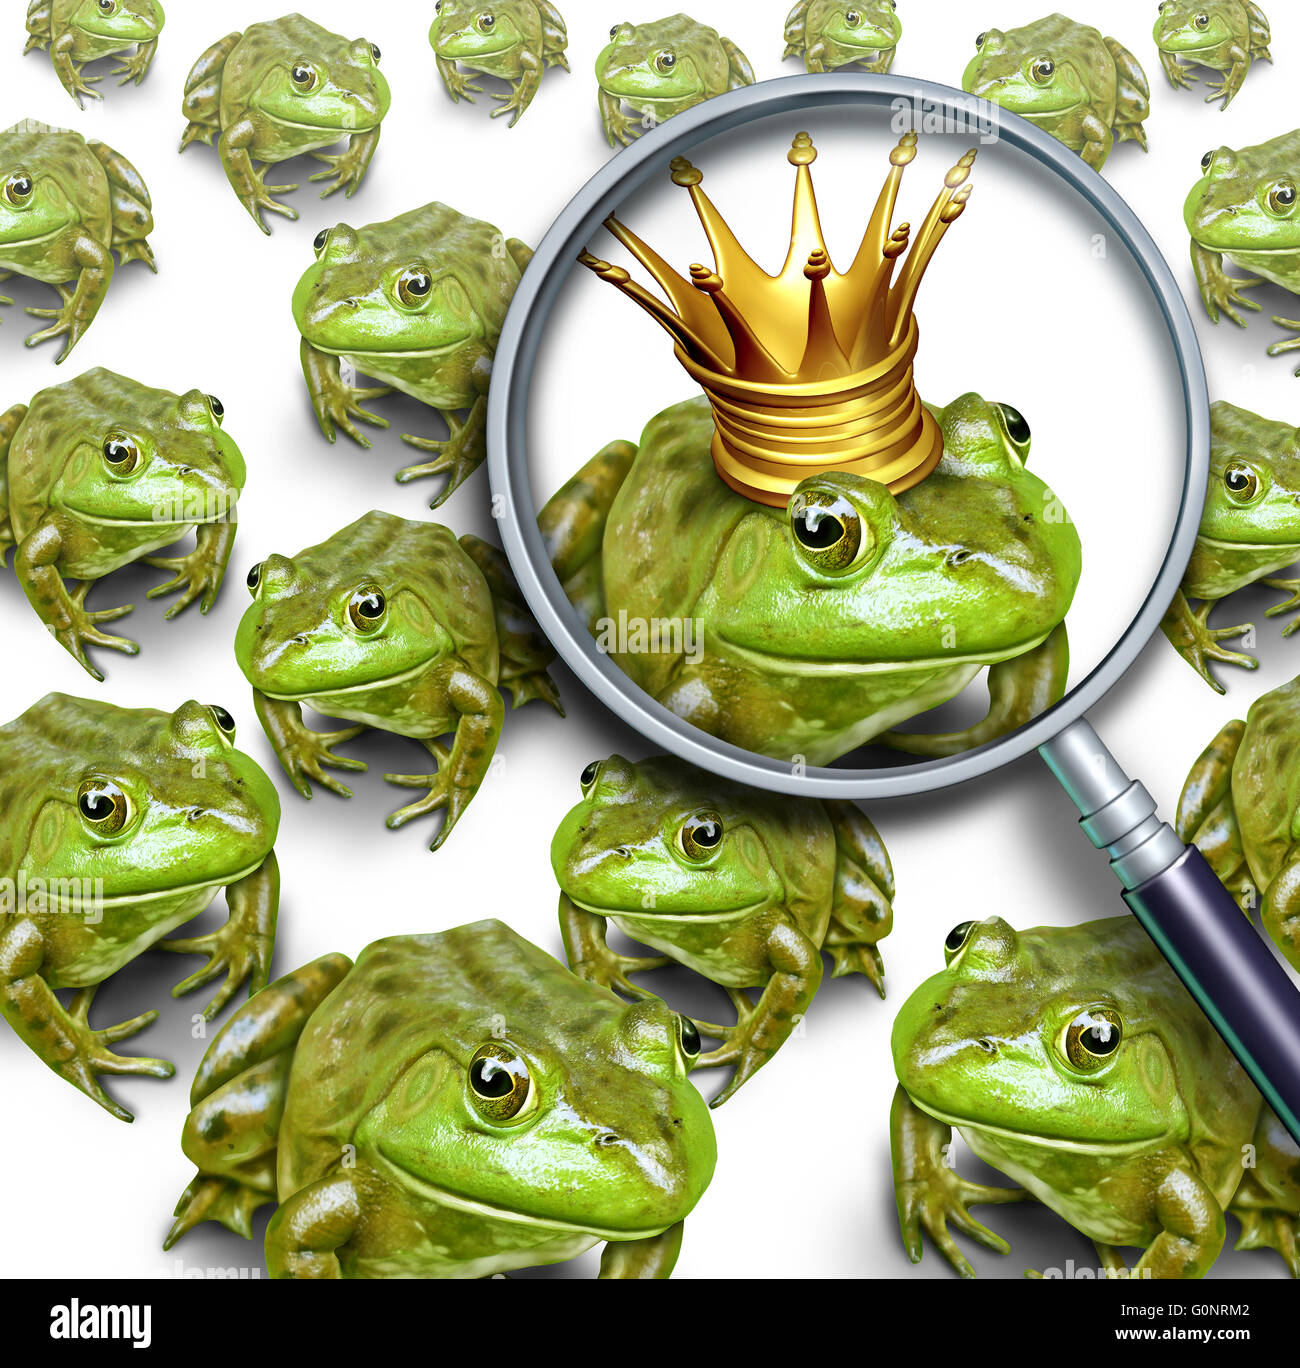 Searching for leadership or search and business recruitment concept as a group of frogs and one individual standing out with a king crown as a metaphor for the right chosen one with 3D illustration elements. Stock Photo